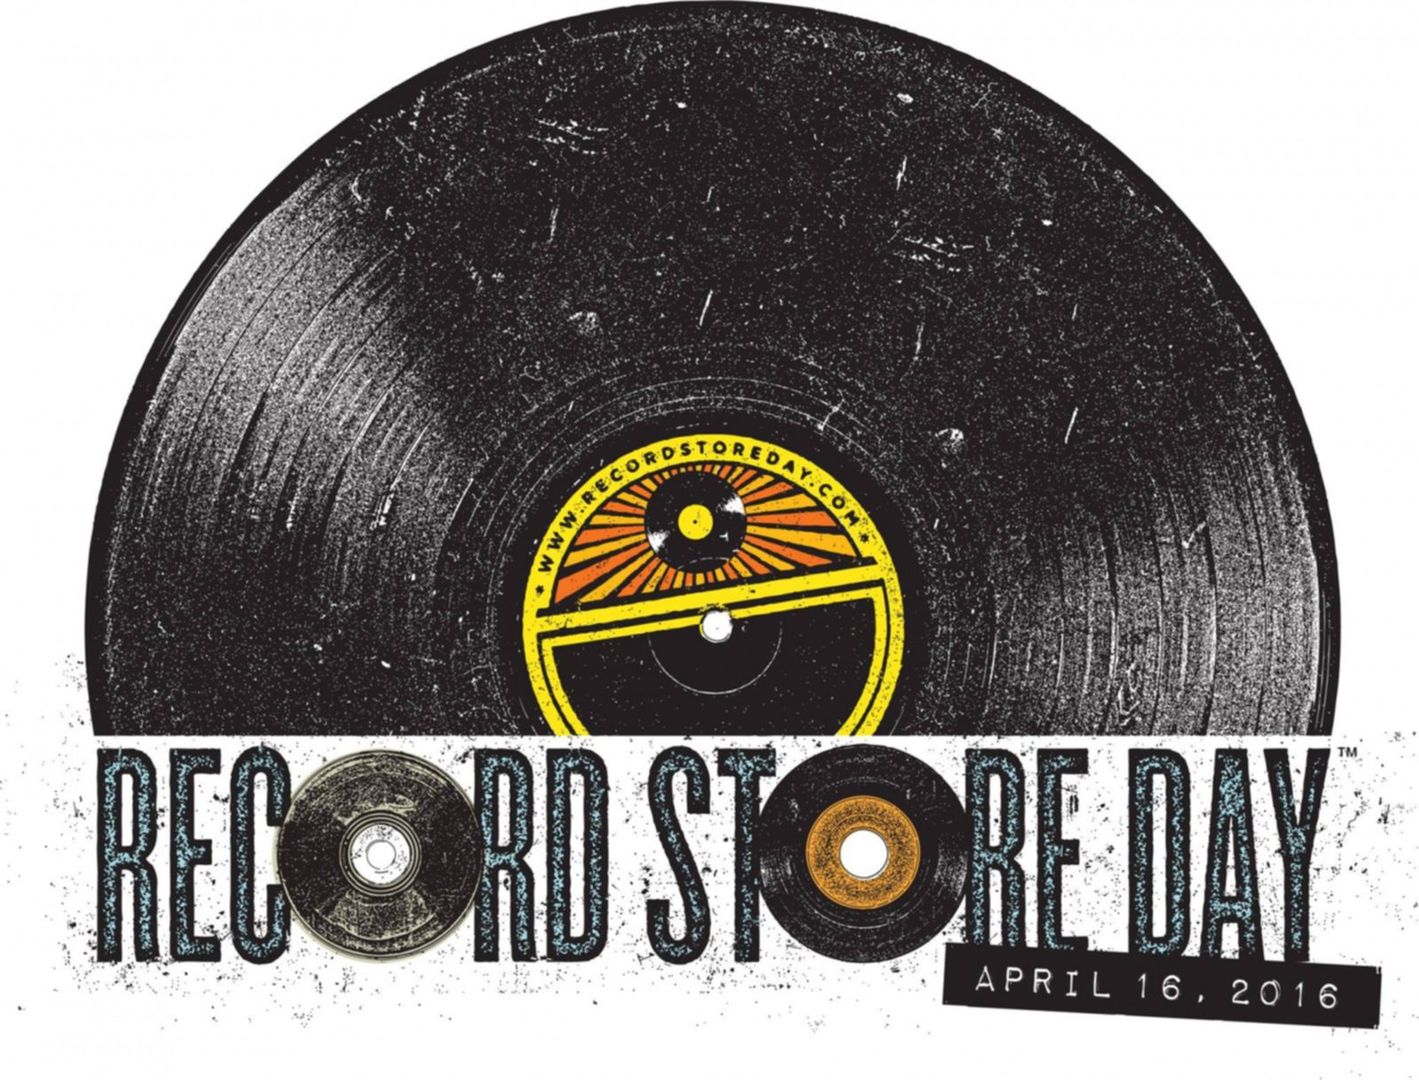 record store day 2016 logo